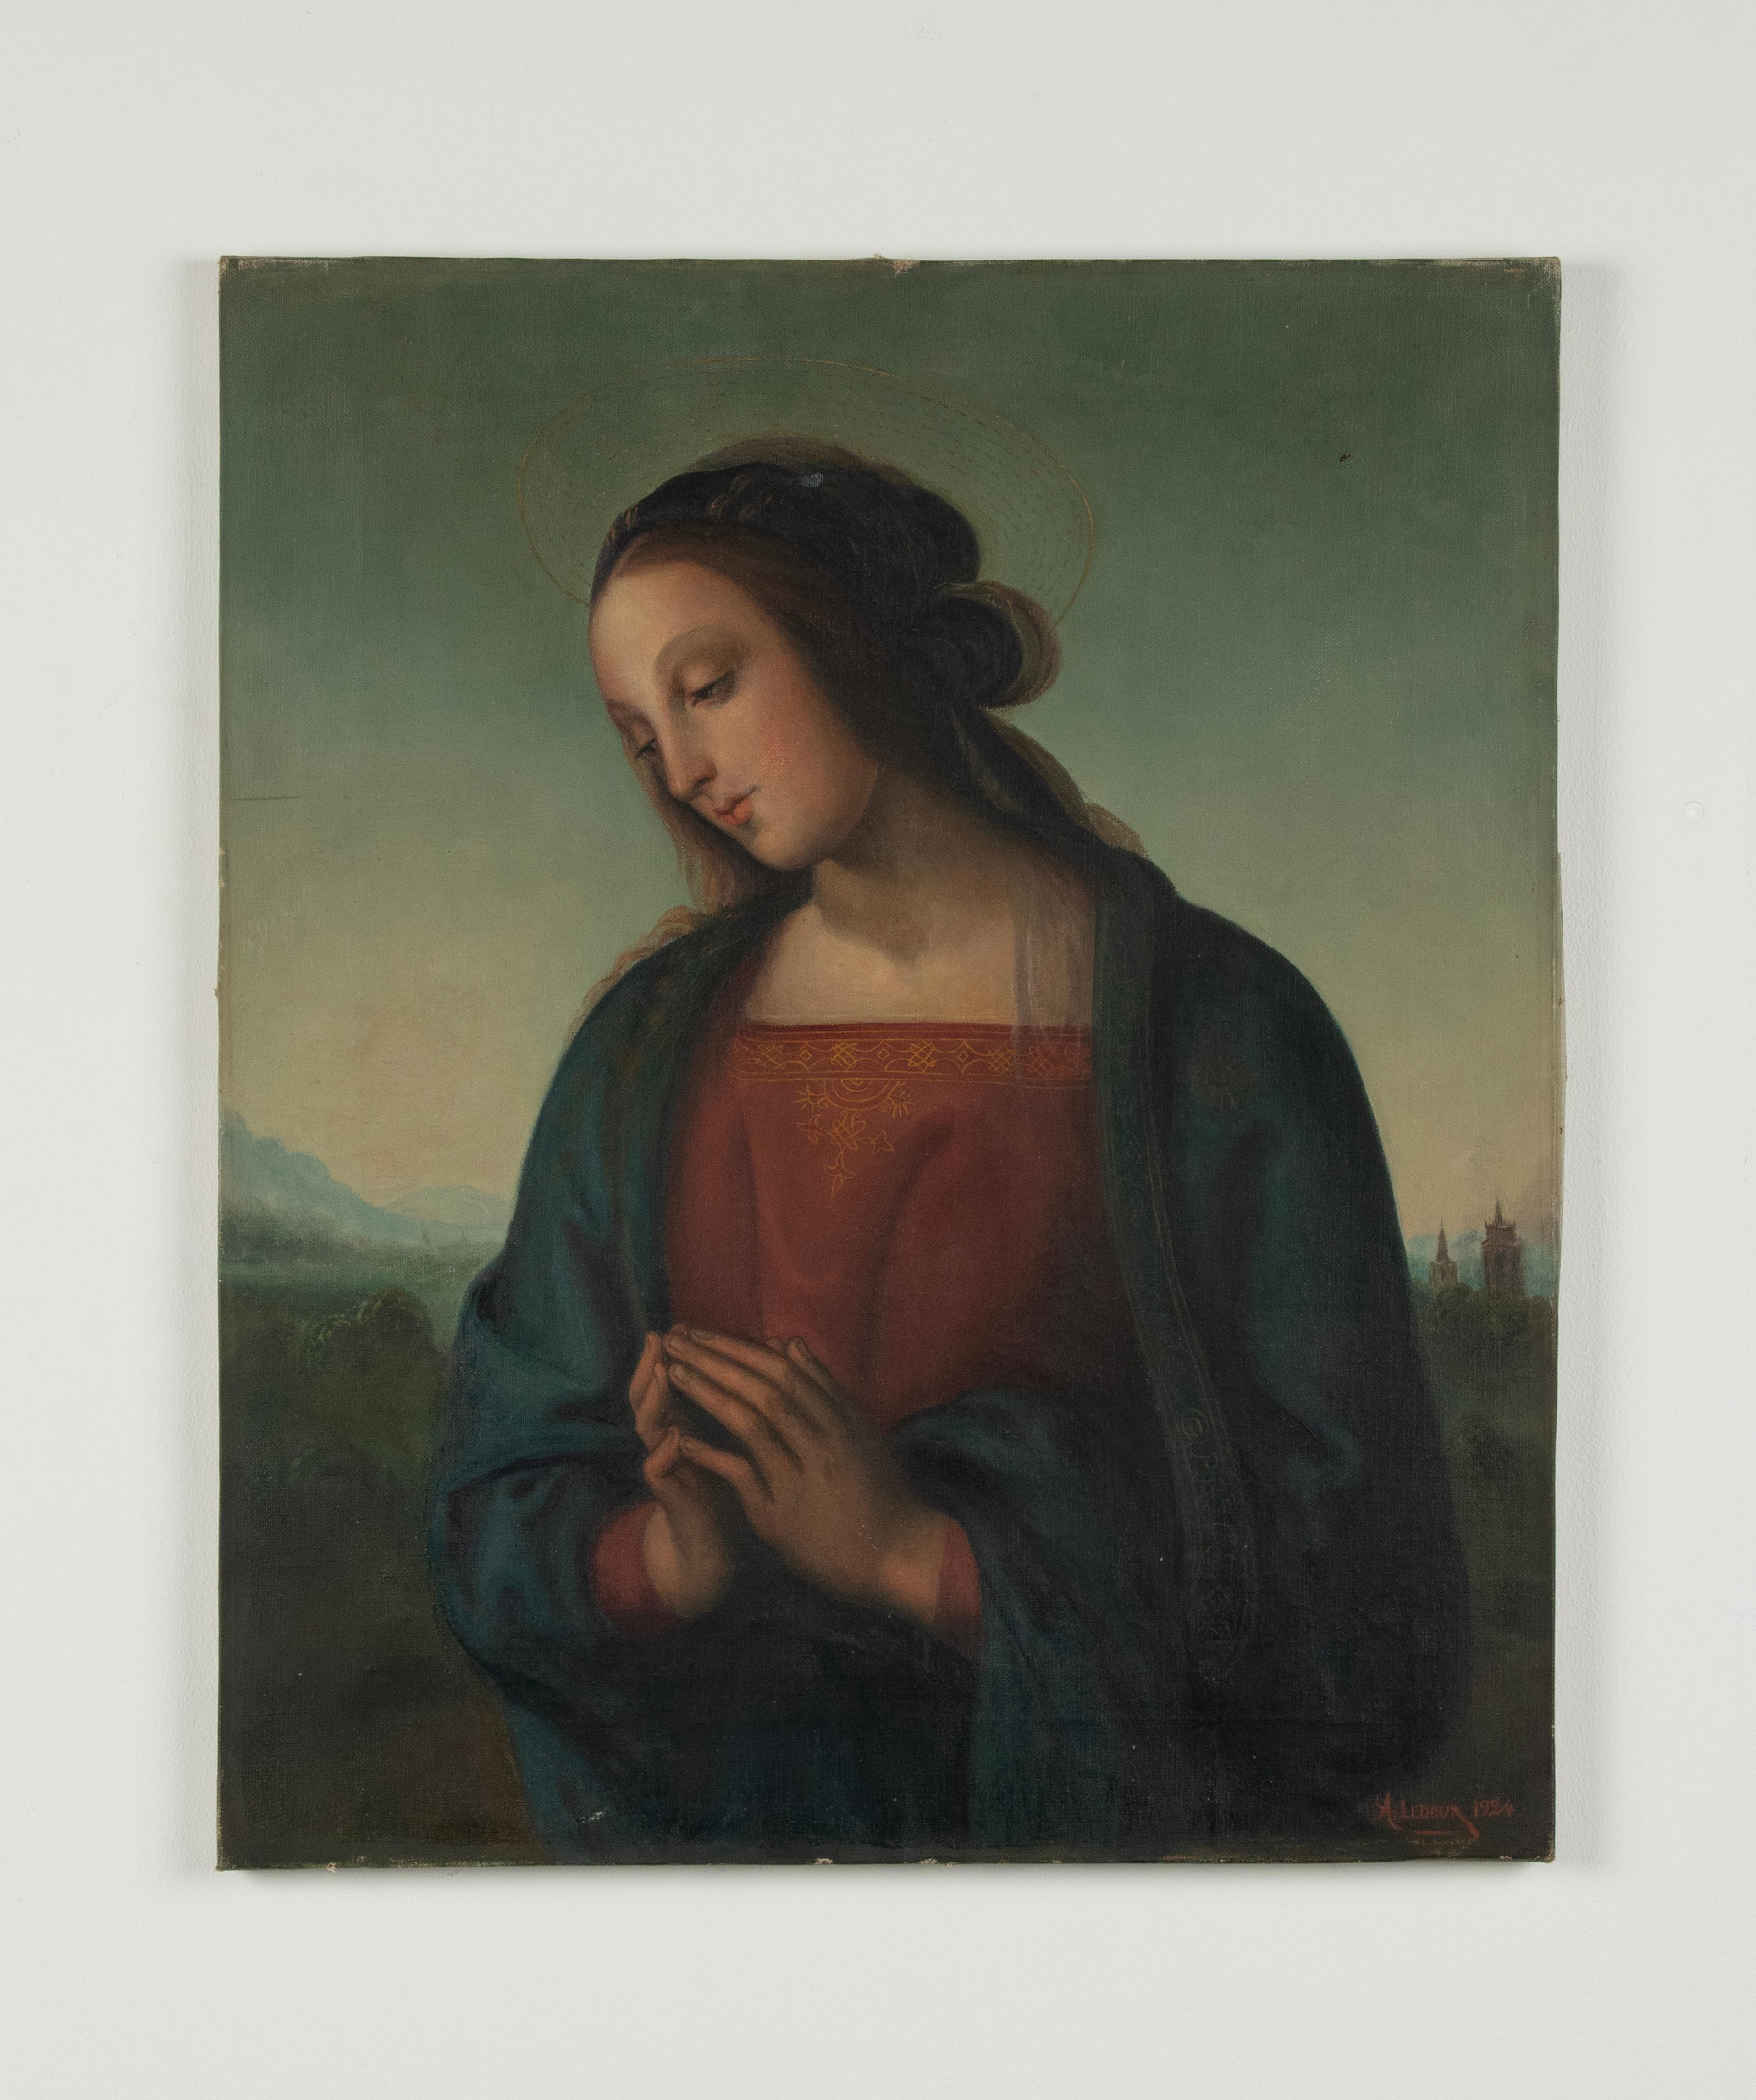 A beautiful painting depicting Mother Mary. 
Oil paint on canvas.
Beautiful understated performance. Atmospheric and striking.
The painting is signed and dated A. Ledoux 1924.
Dimensions: 55 x 46 cm
Free Shipping
